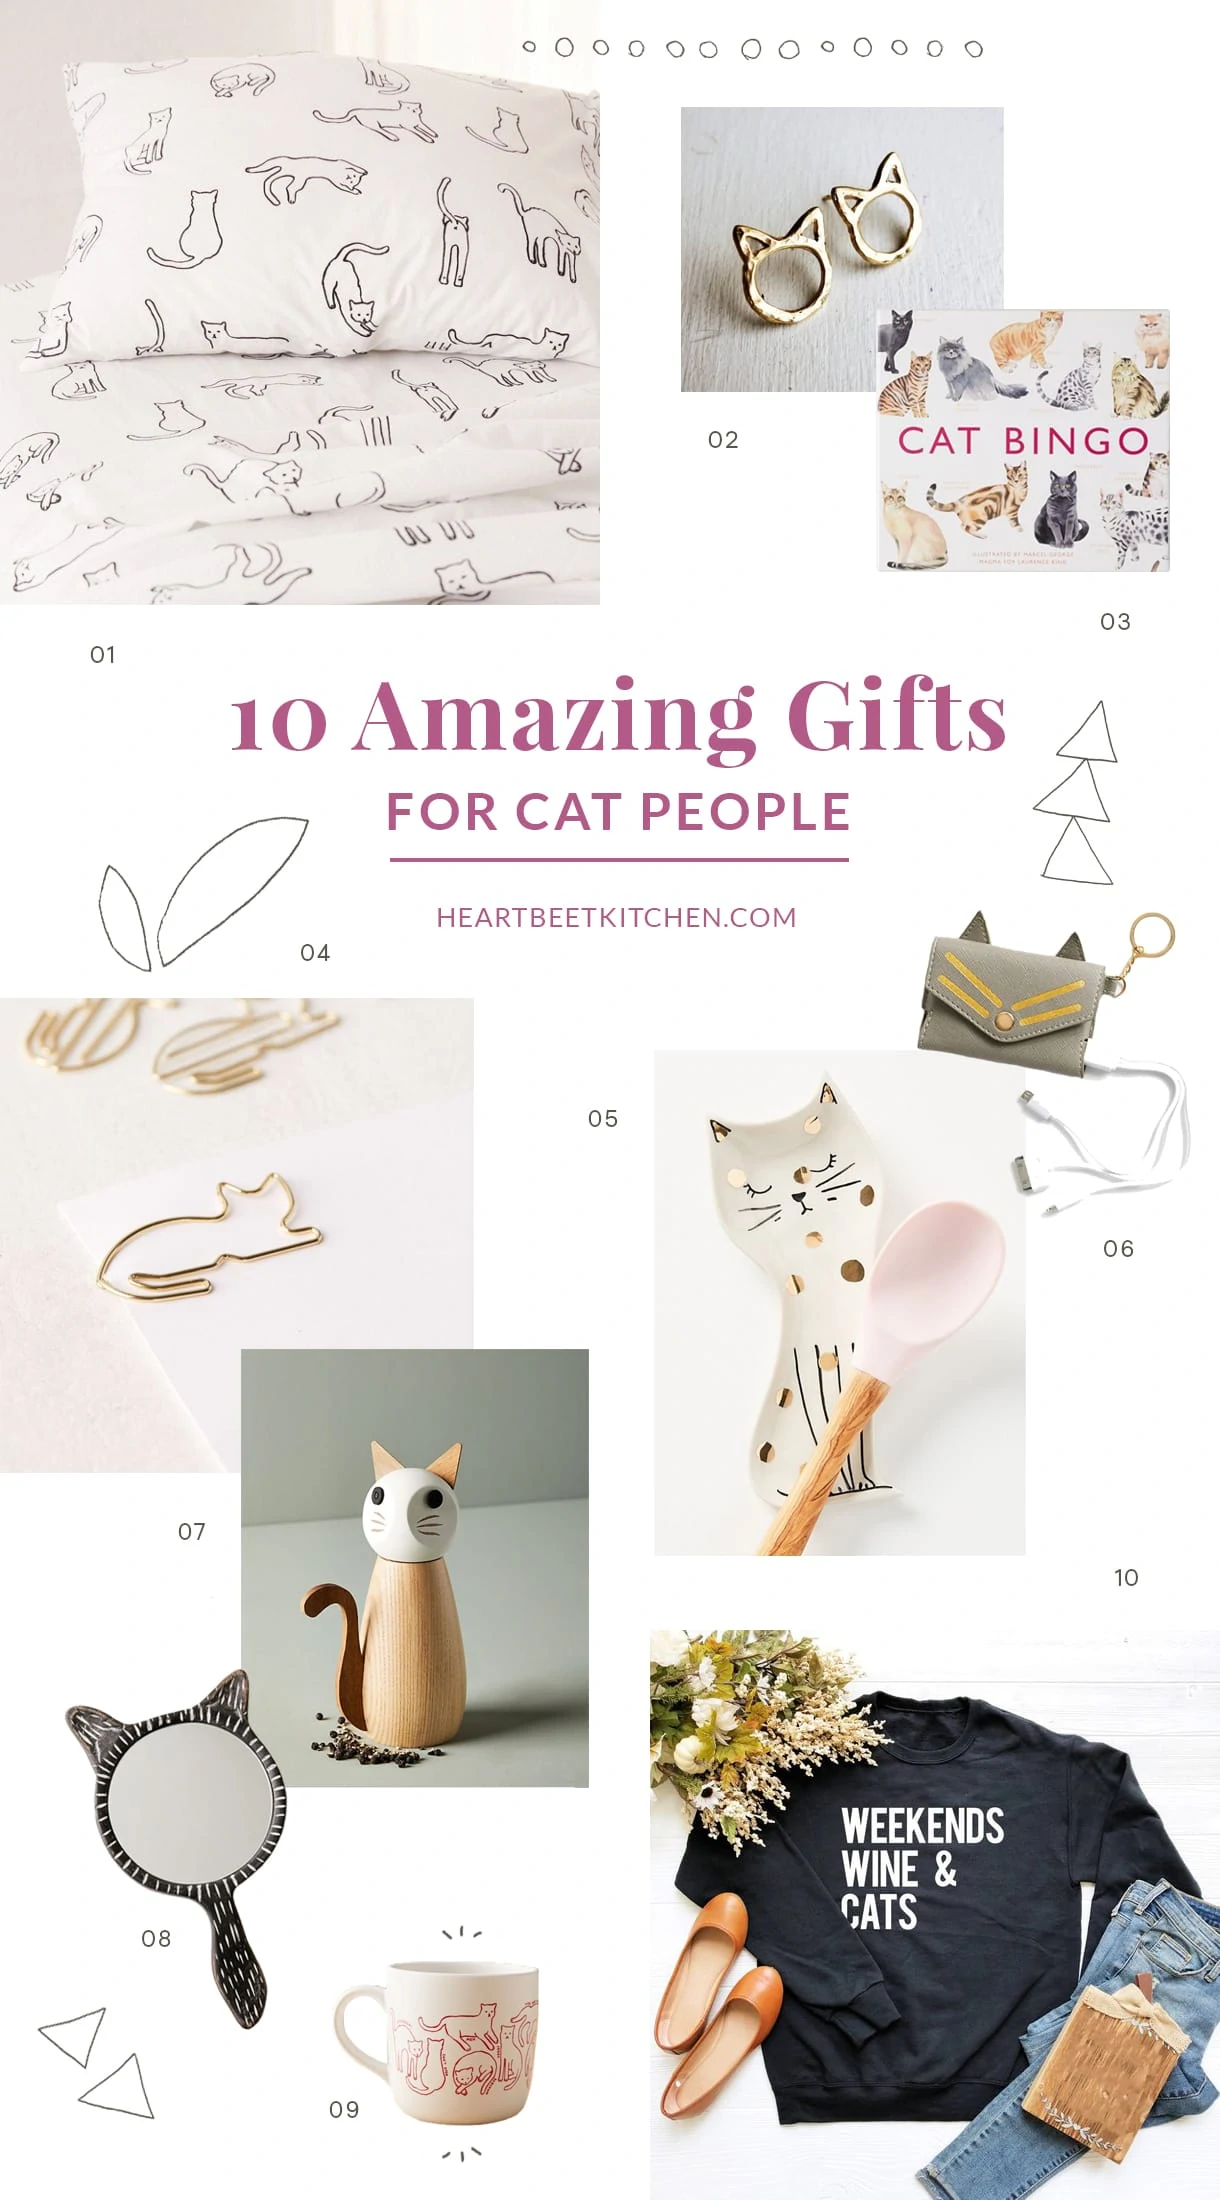 10 Amazing Gifts for Cat People, People who love cats, Cat Lovers